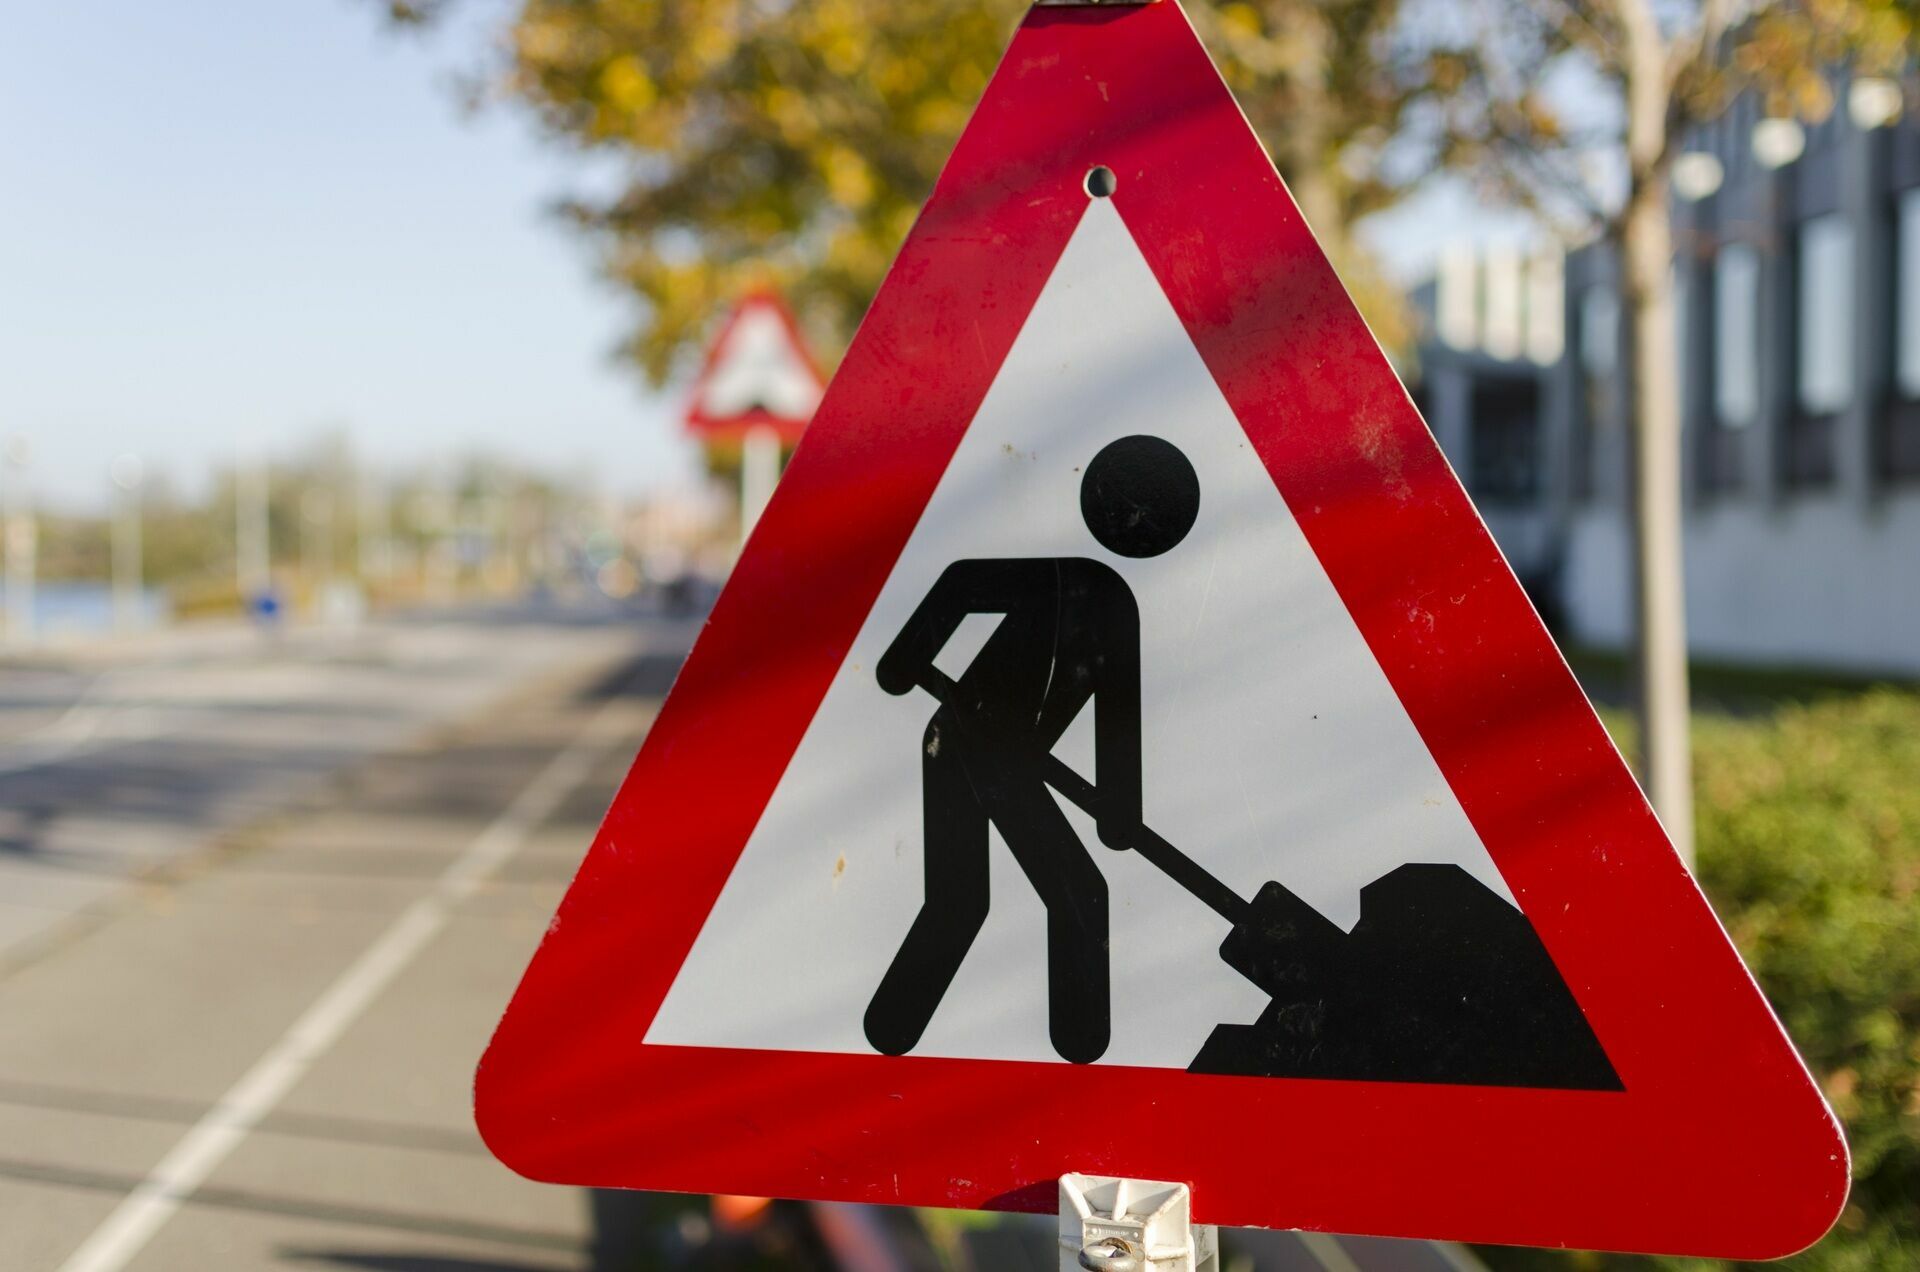 The road construction sector sent an SOS signal to the Ministry of Construction